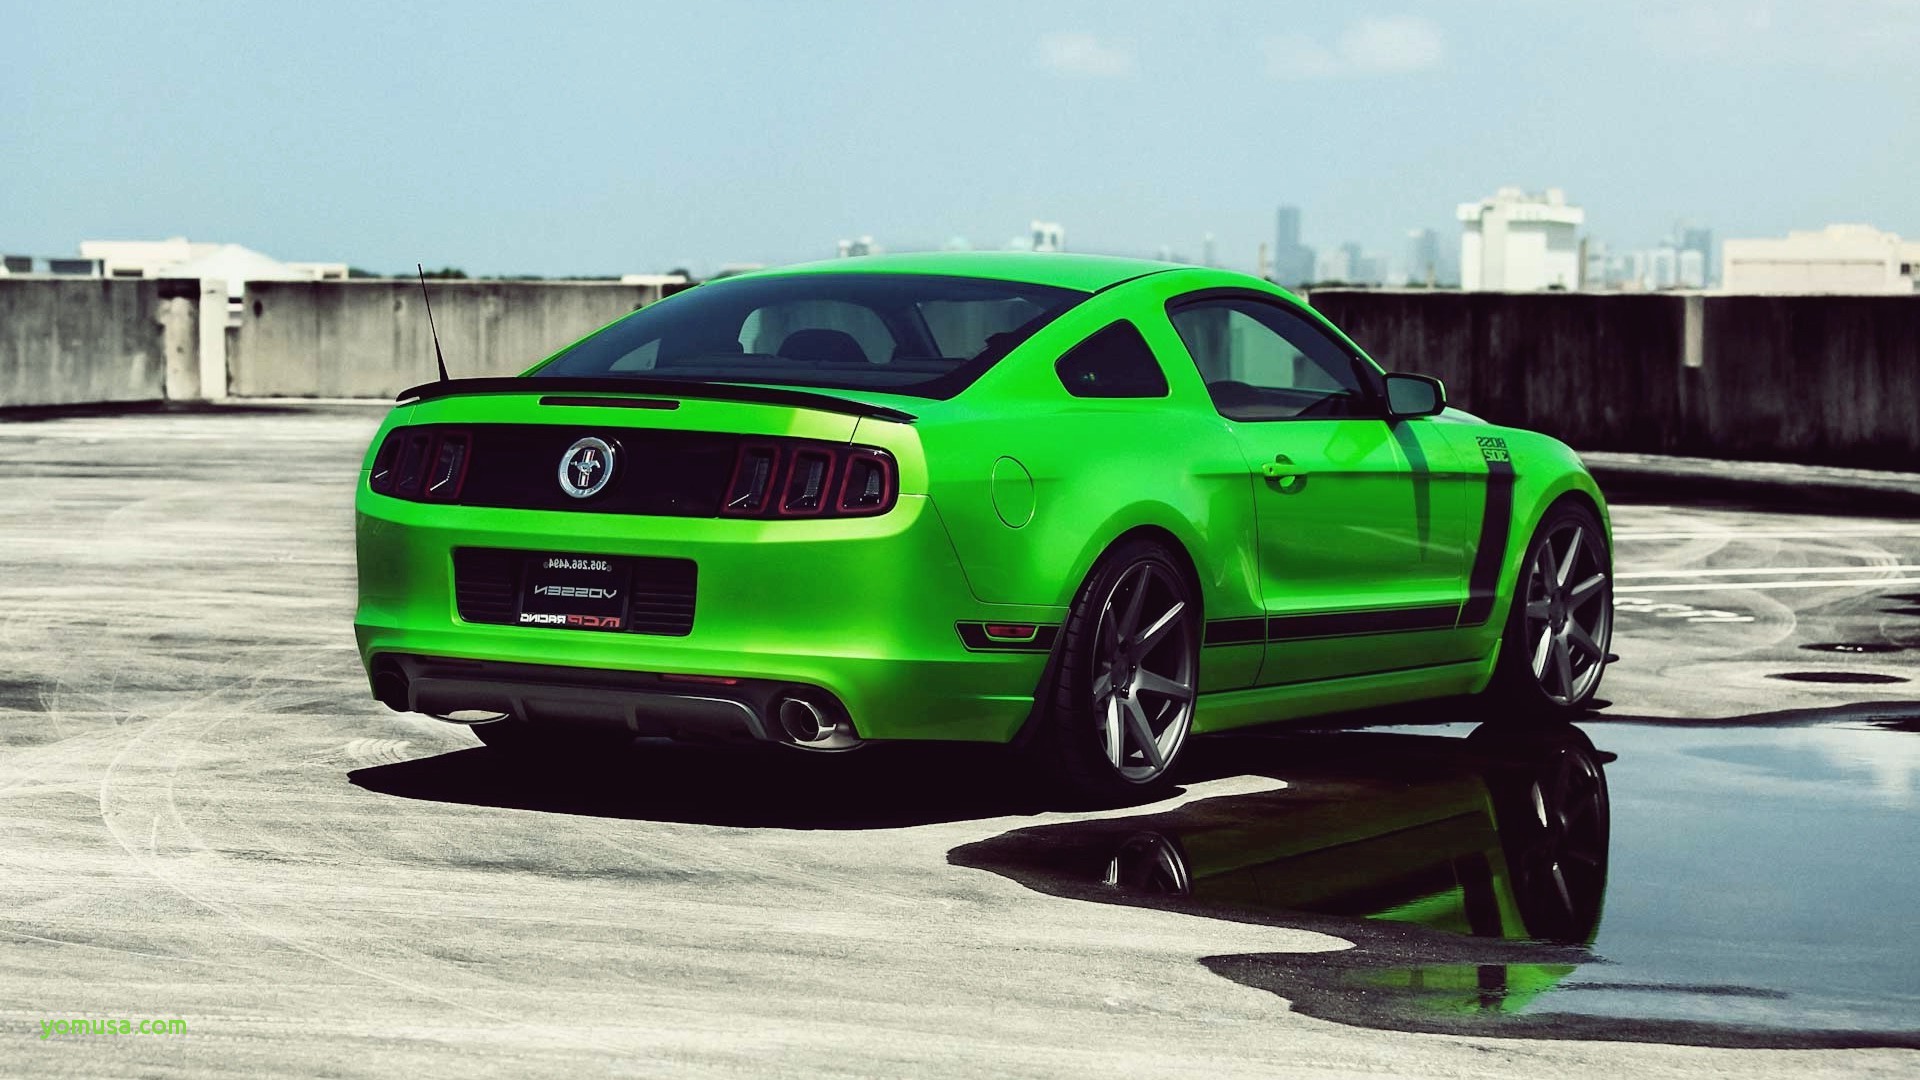 Ford Mustang Hd Wallpapers 1080p - Shelby Mustang - HD Wallpaper 